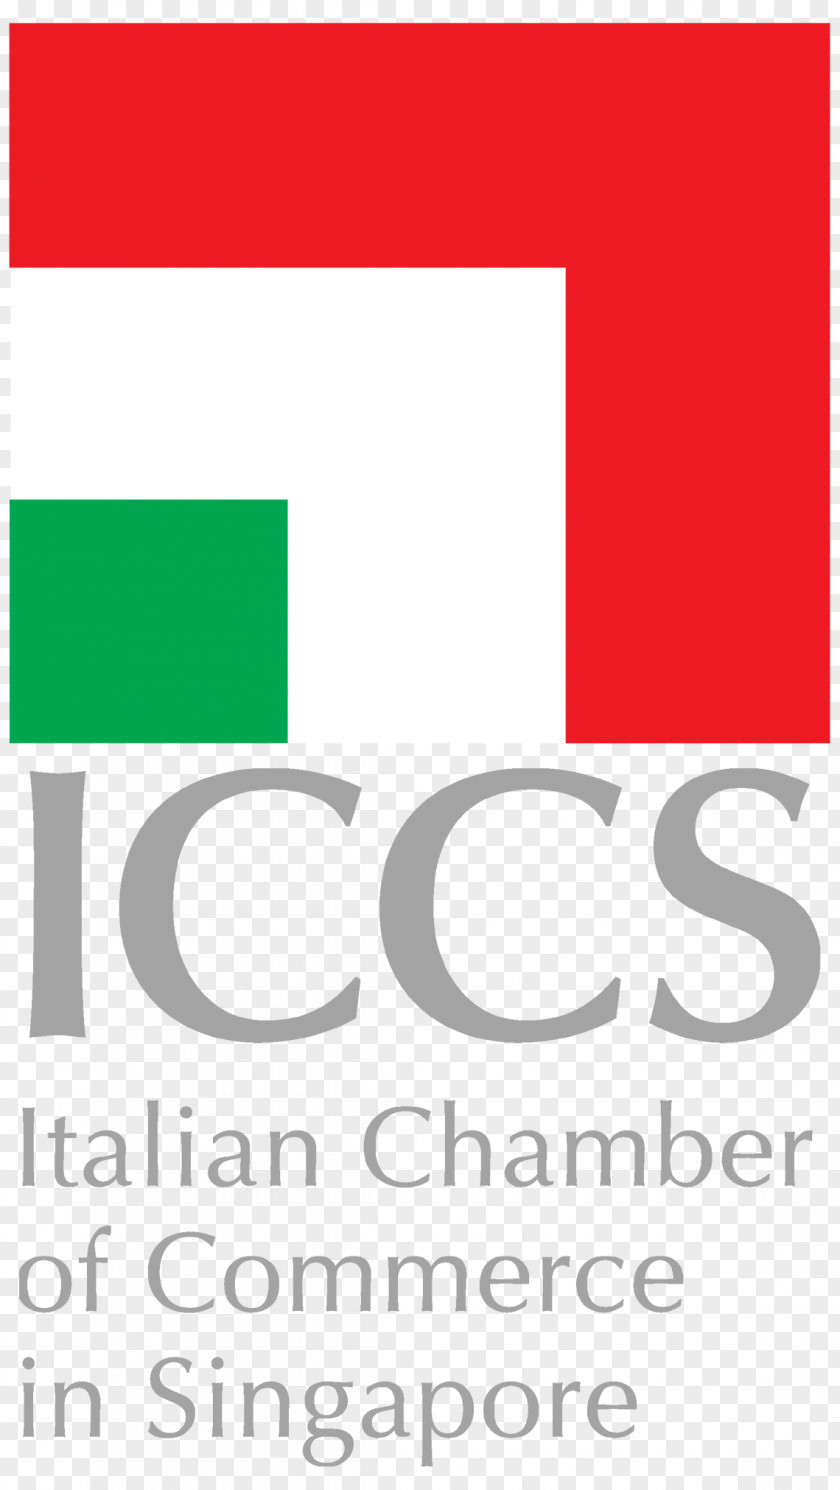 Government Calendar 2018 Malaysia Italian Chamber Of Commerce In Singapore (Singapore) Logo Study At Raffles Product PNG